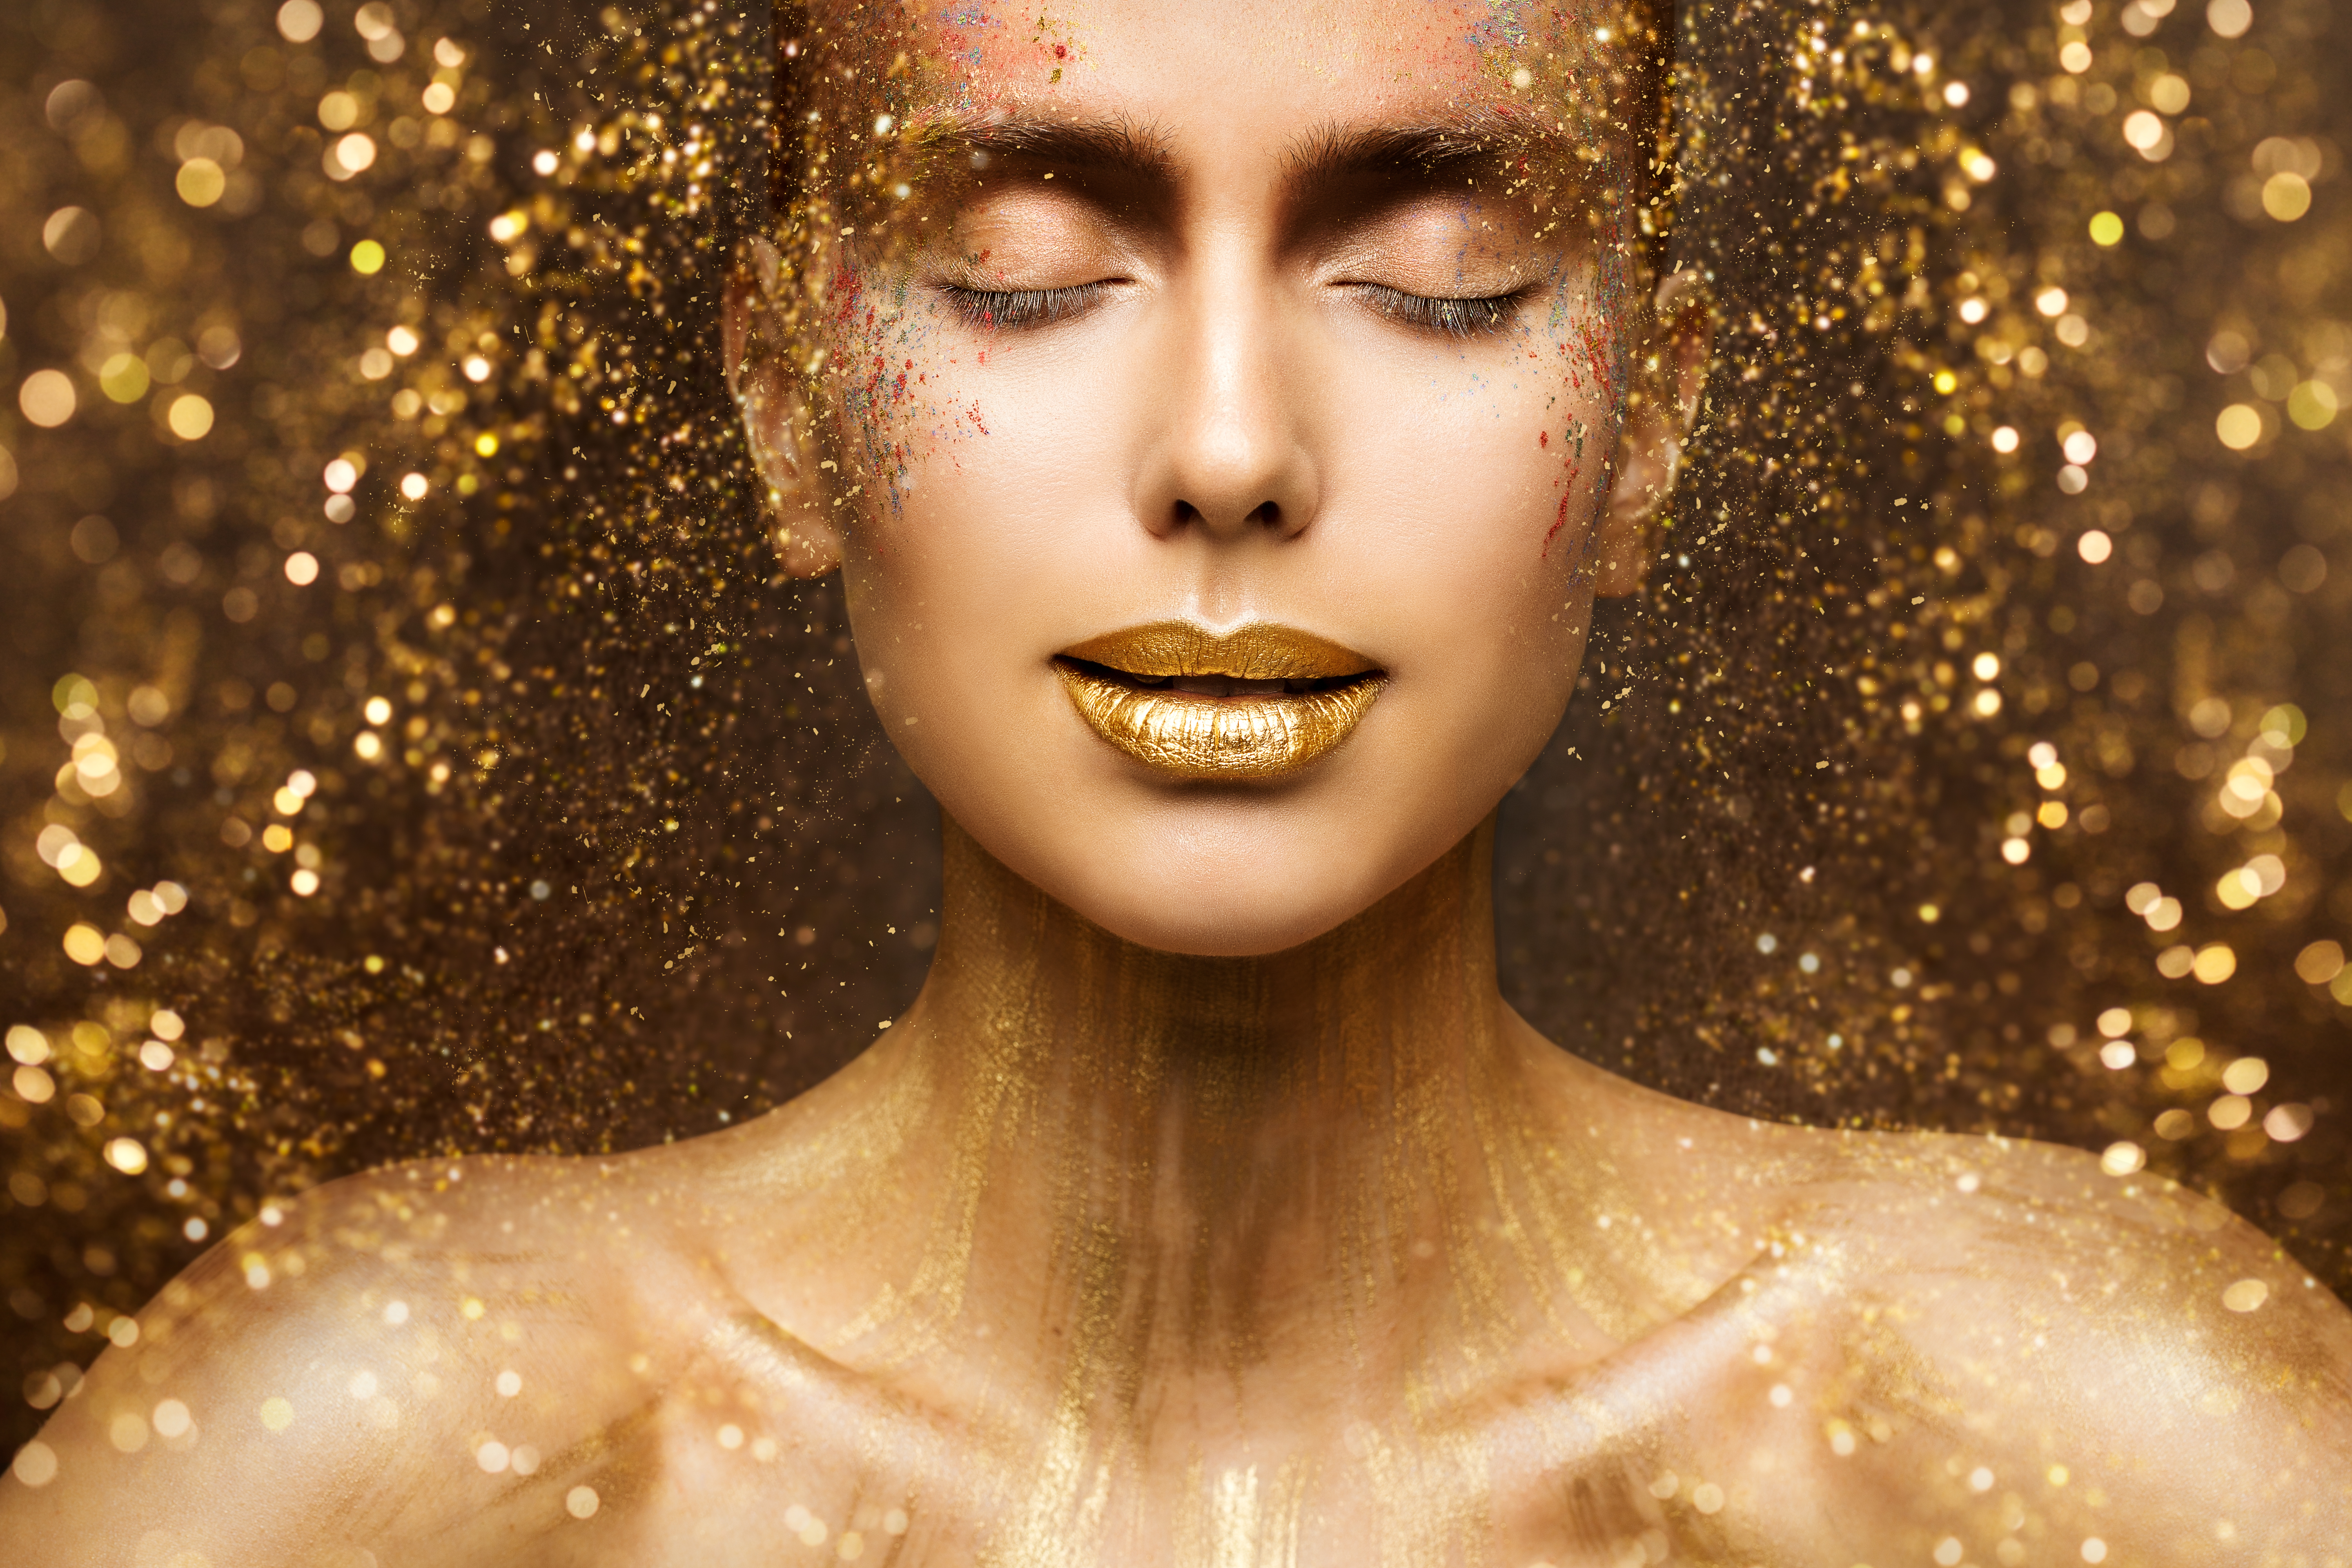 Woman covered in gold. | Source: Getty Images